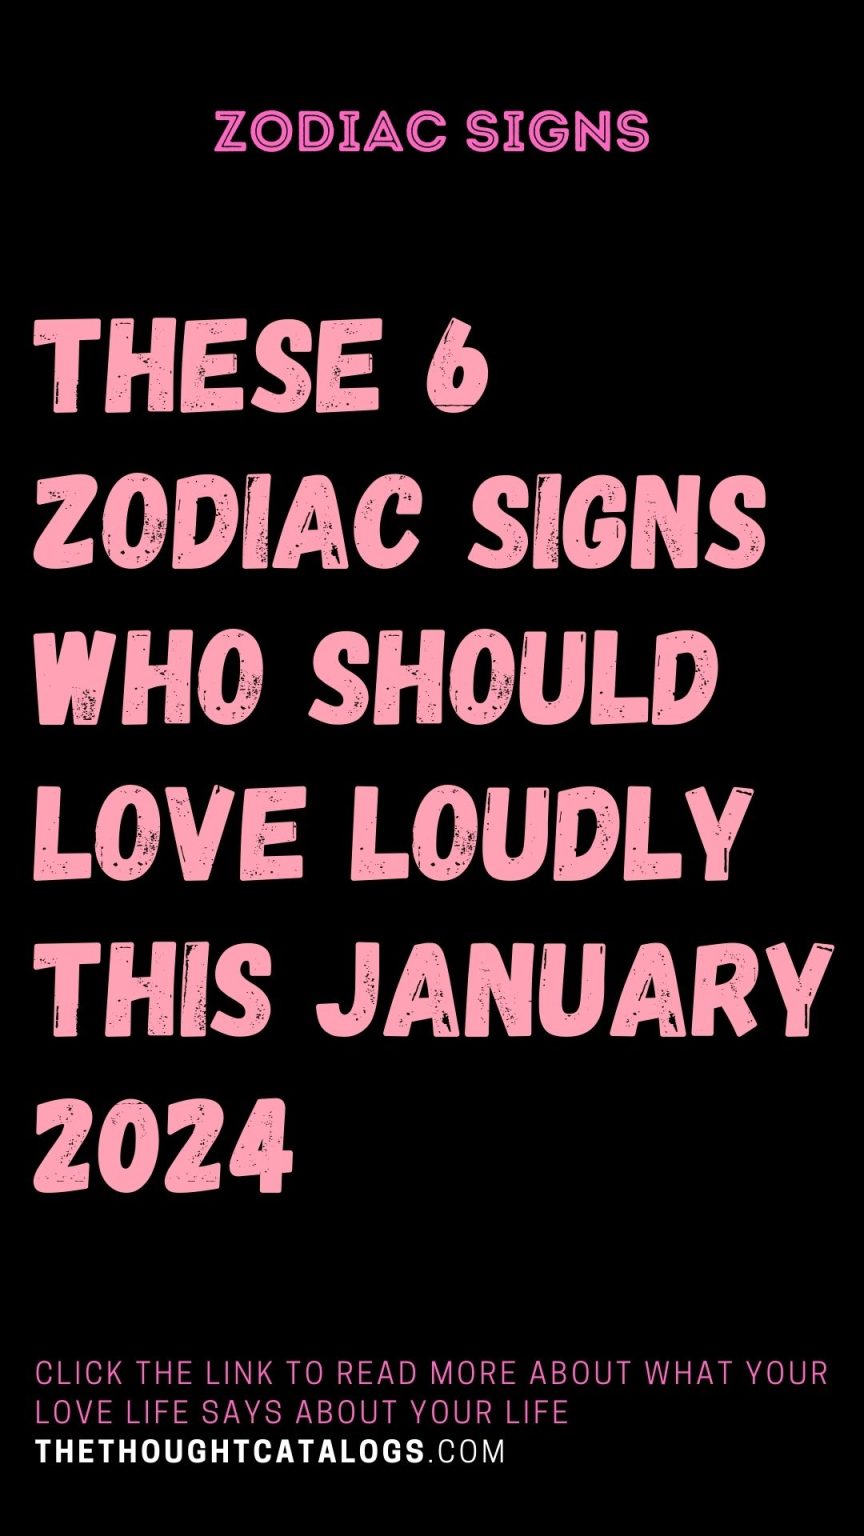 These 6 Zodiac Signs Who Should Love Loudly This January 2024